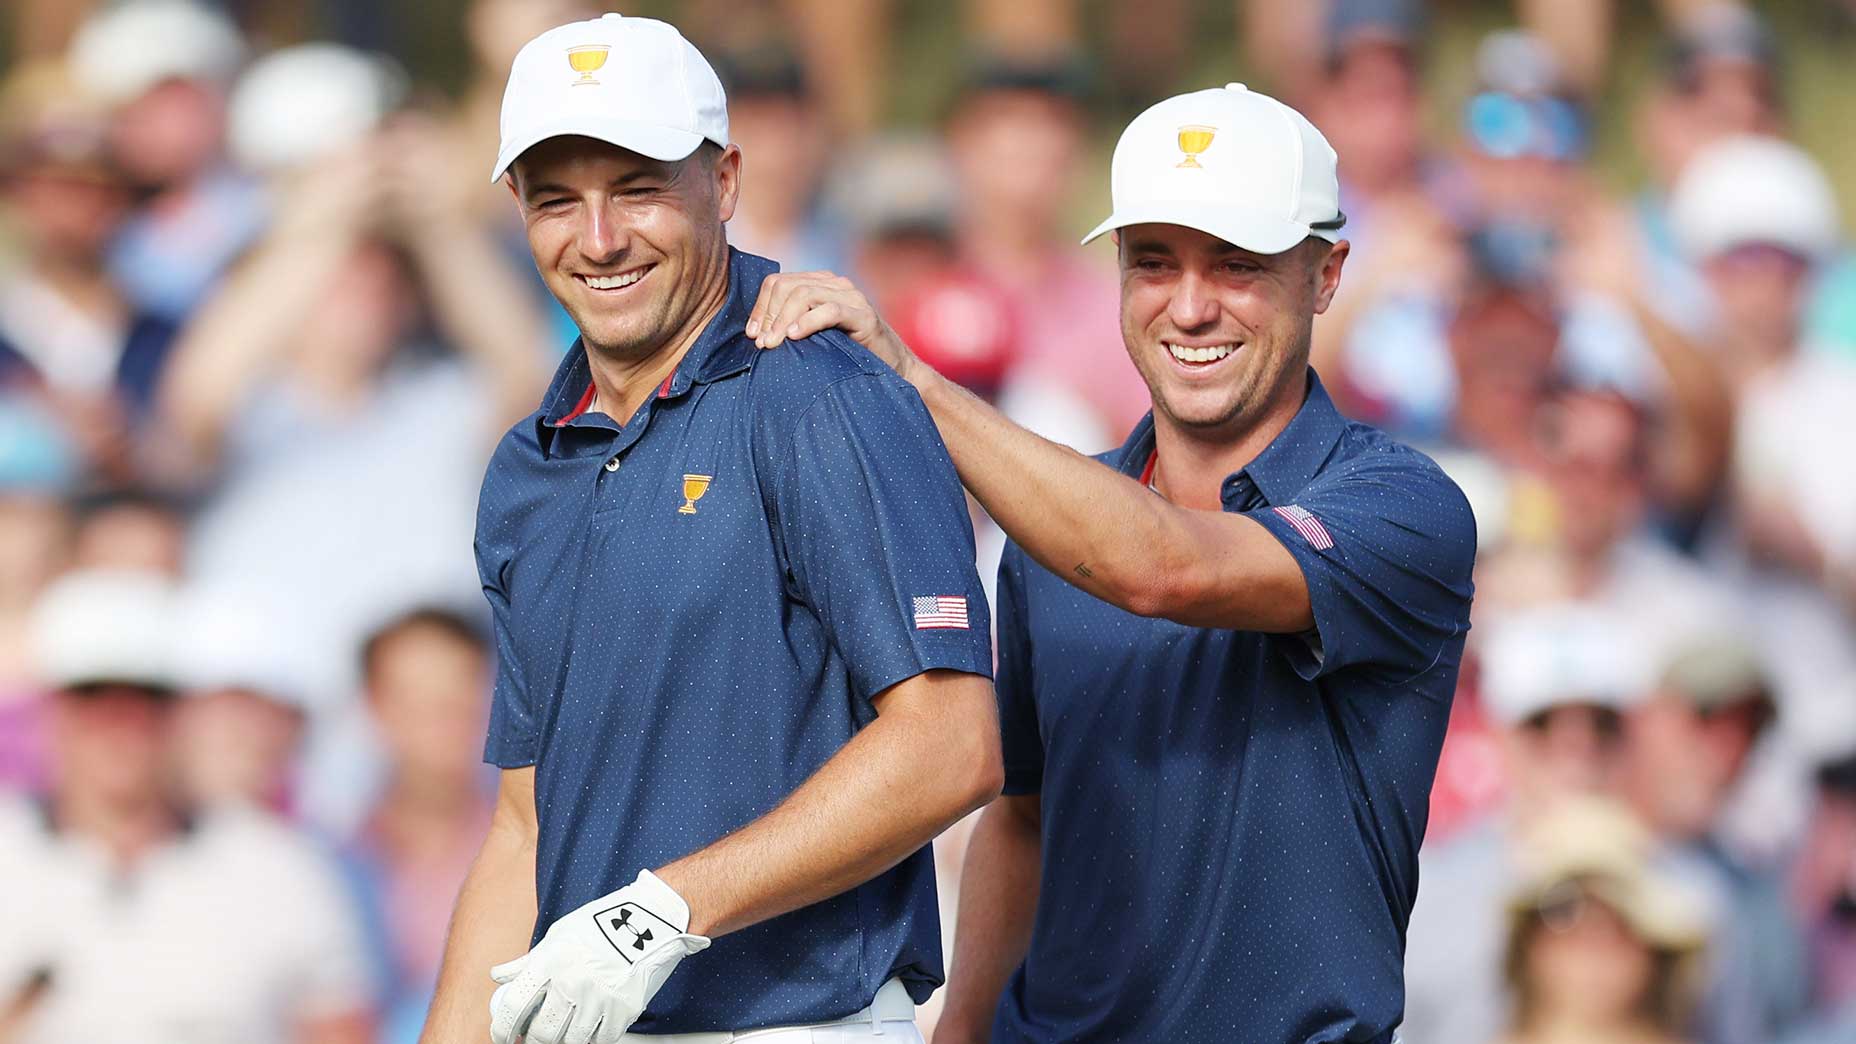 Jordan Spieth and Justin Thomas pictured at the 2022 Presidents Cup at Quail Hollow Club on Sept. 24, 2022 in Charlotte, N.C.